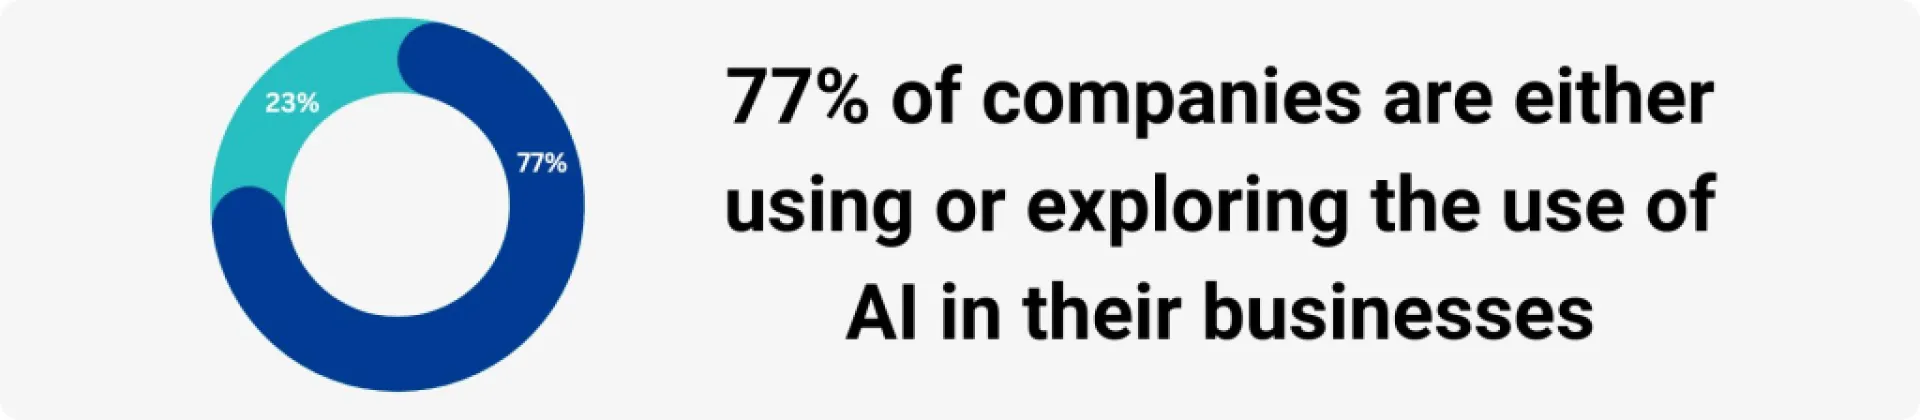 77% of companies are either using or exploring the use of AI in their businesses